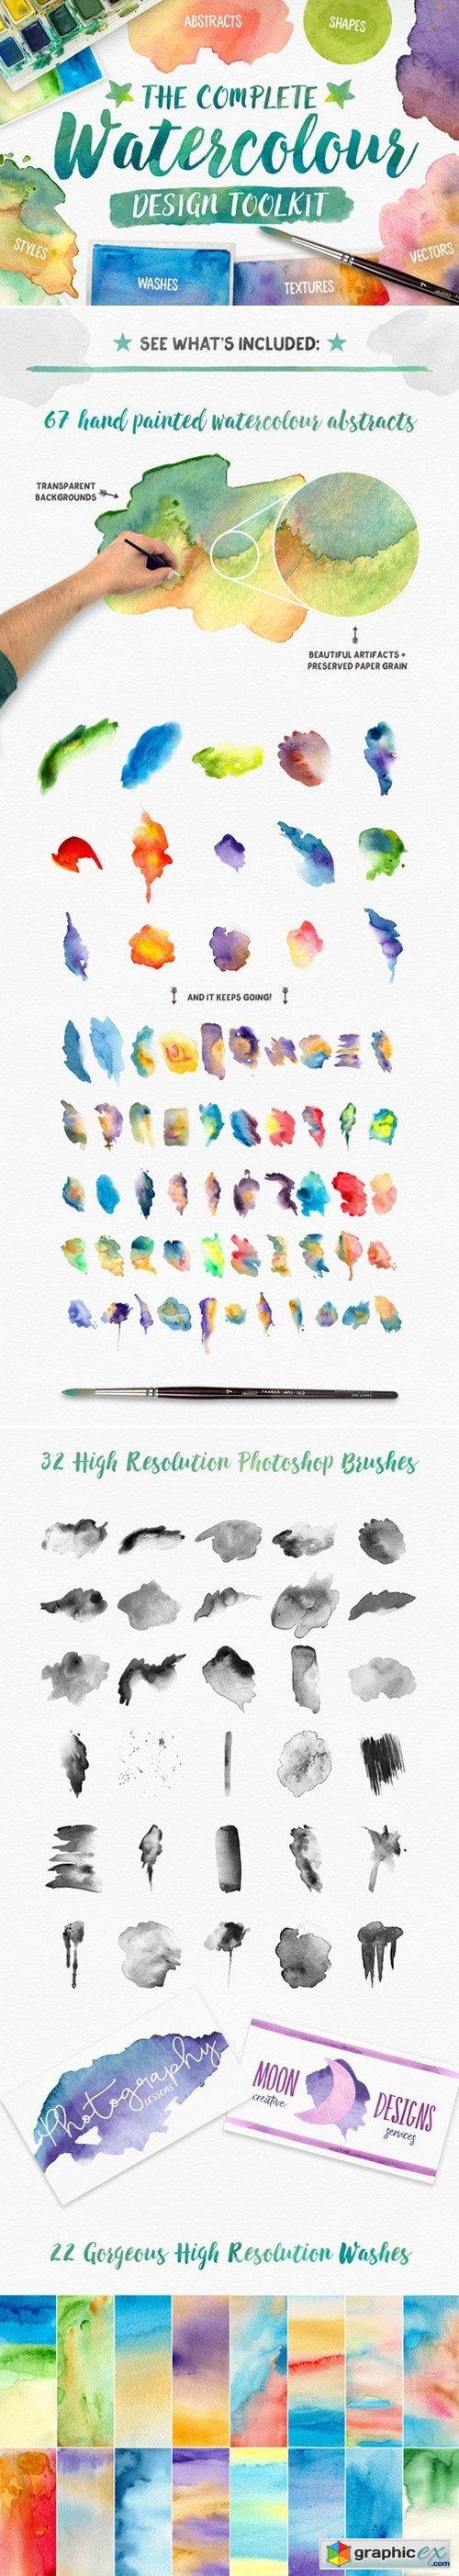 Complete Watercolour Design Toolkit